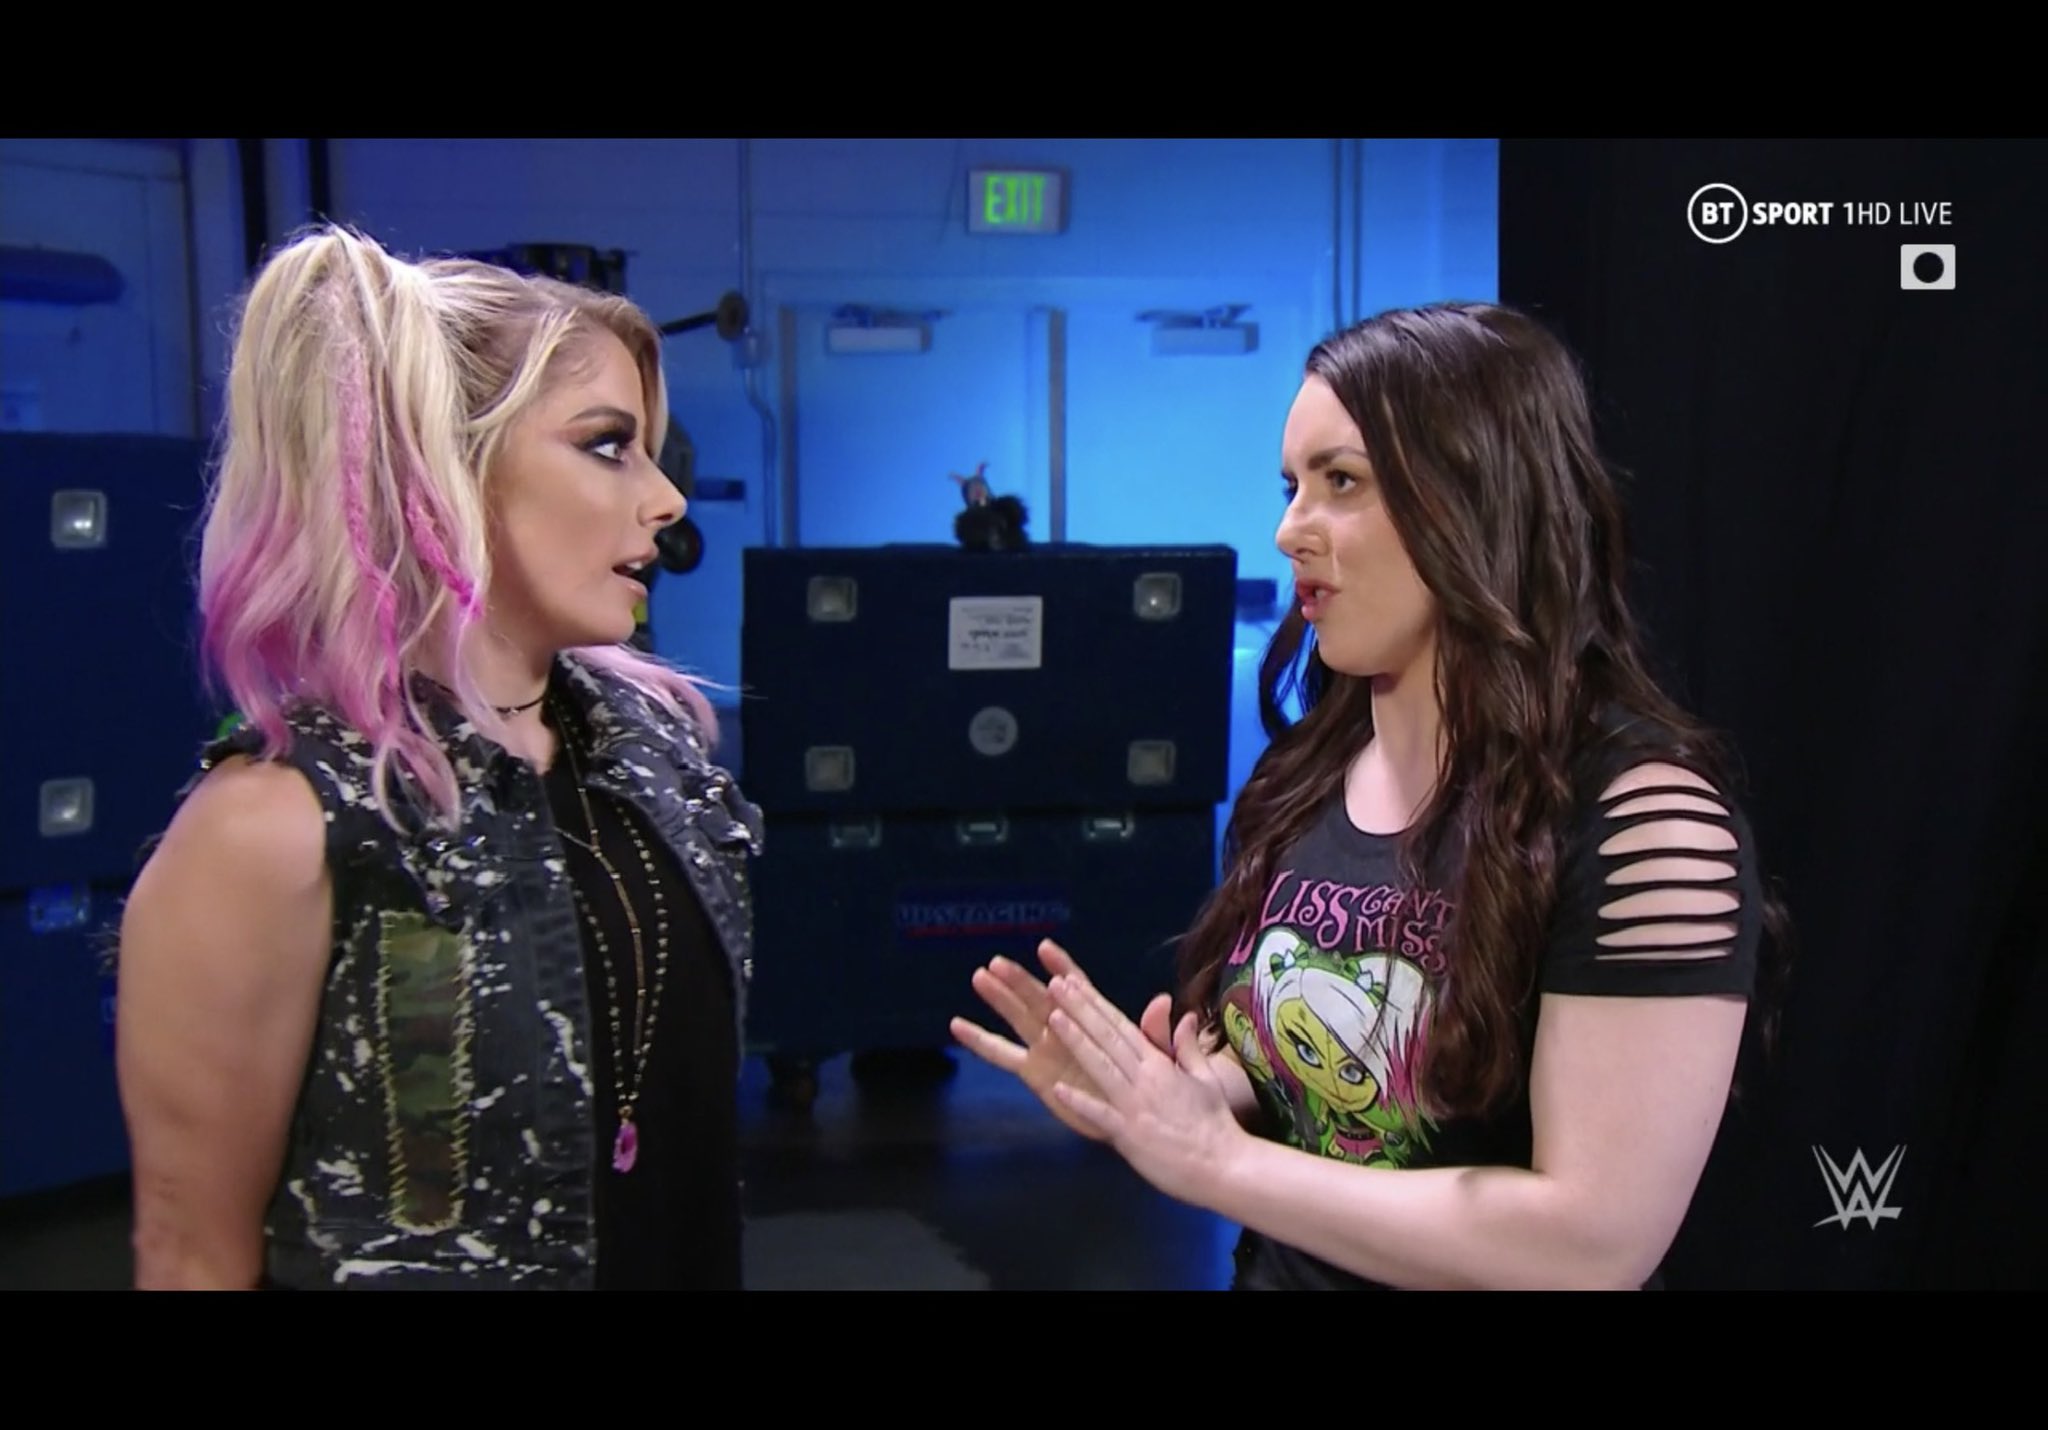 Alexa Bliss Porn Video - Firefly Fun House Character Spotted In Backstage WWE SmackDown Segment,  Possible Storyline Development